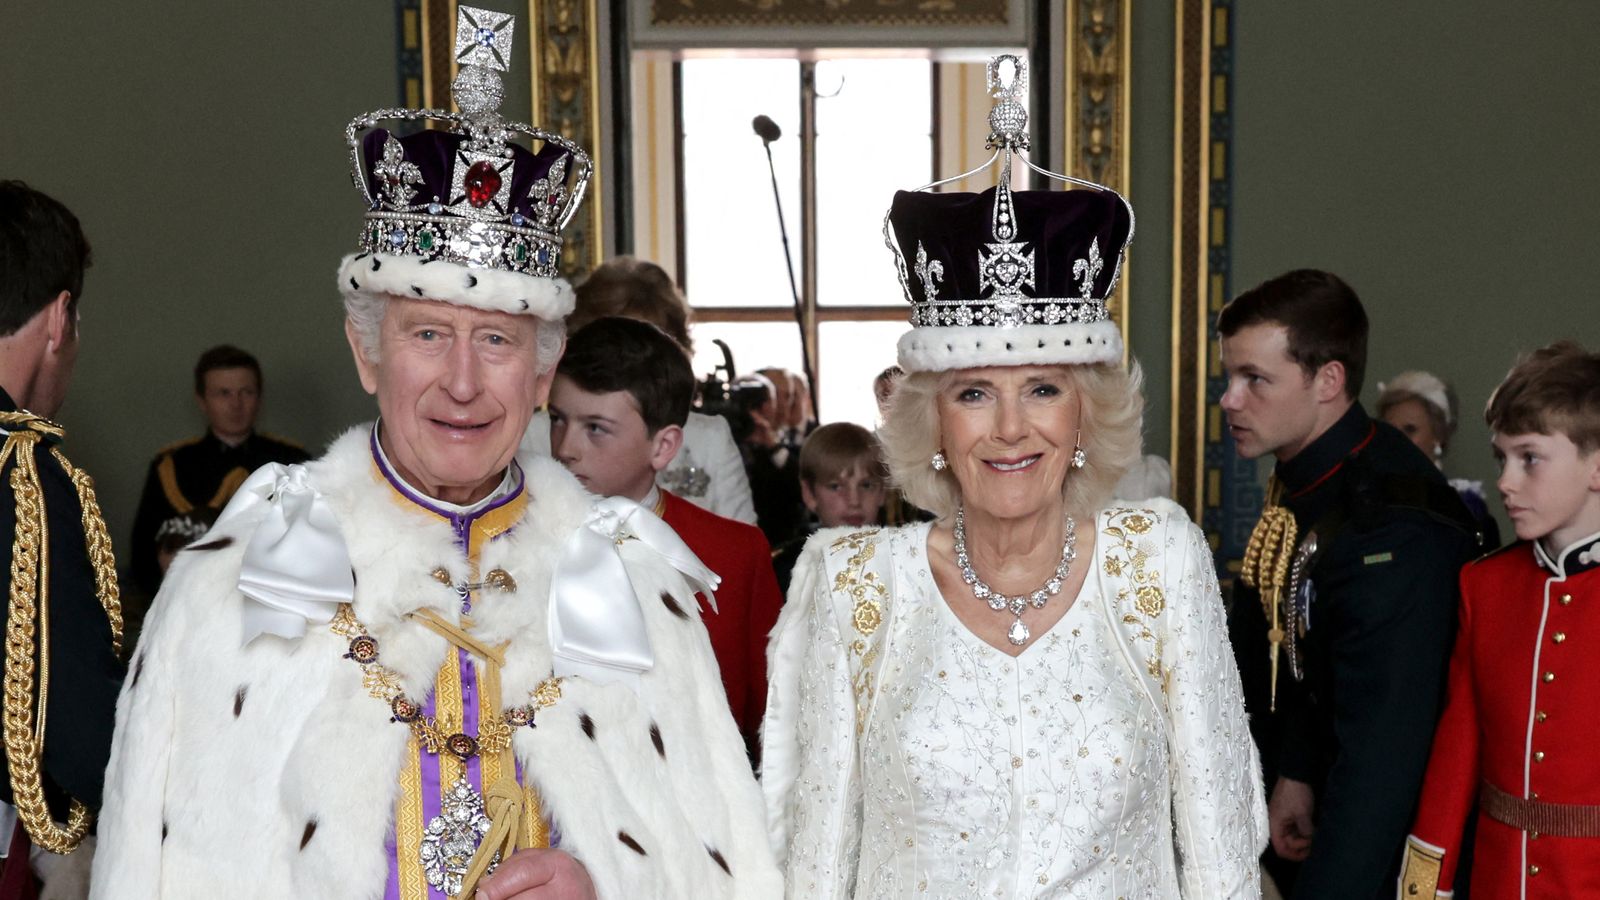 King and Queen 'deeply touched' by nation's celebration of 'glorious' coronation